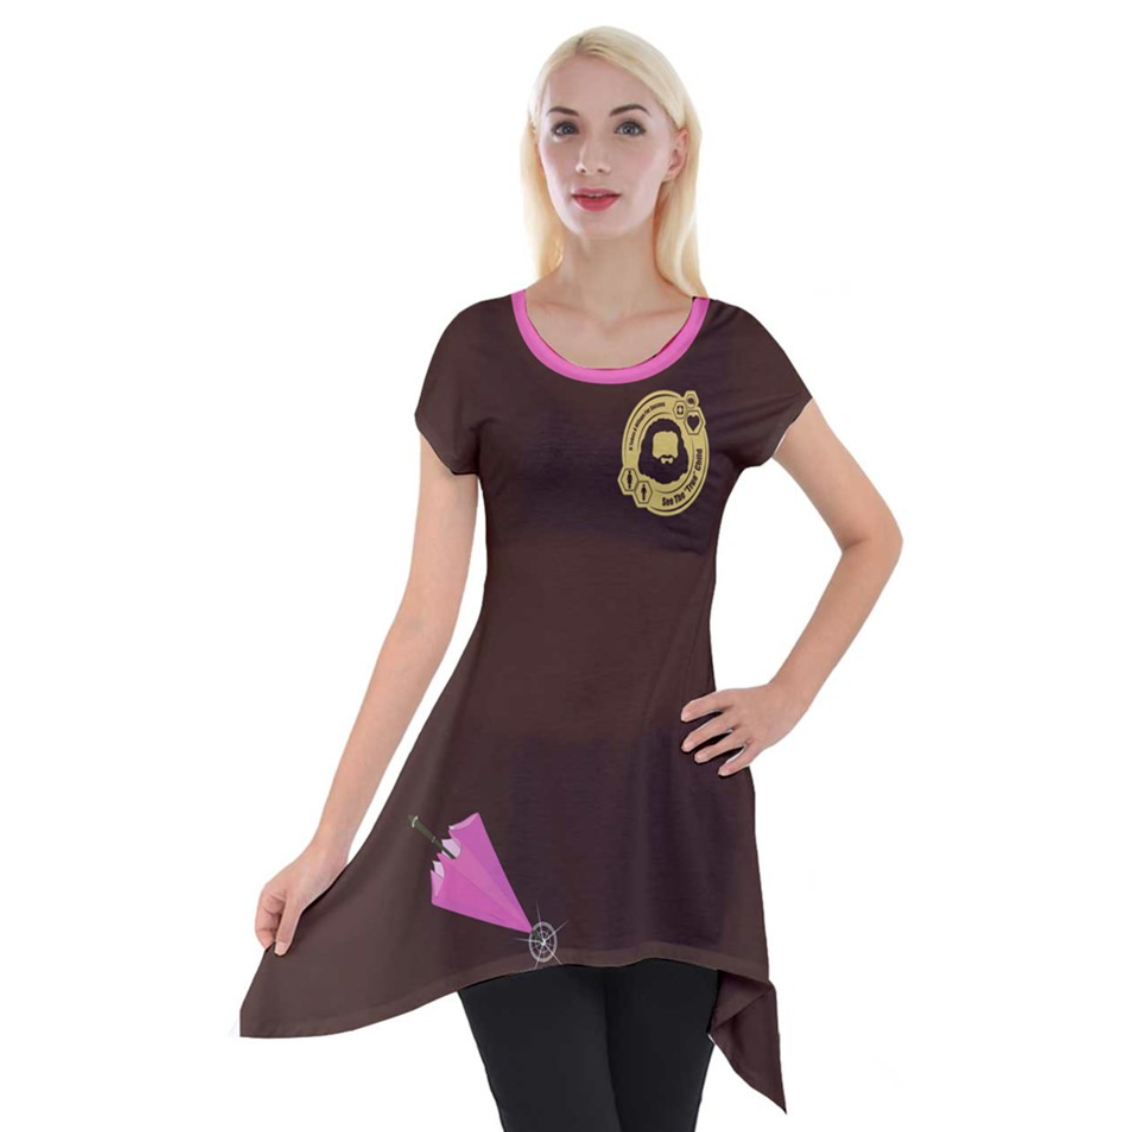 See The "TRUE" Child Short Sleeve Side Drop Tunic - Inspired by Literary Character, Hagrid